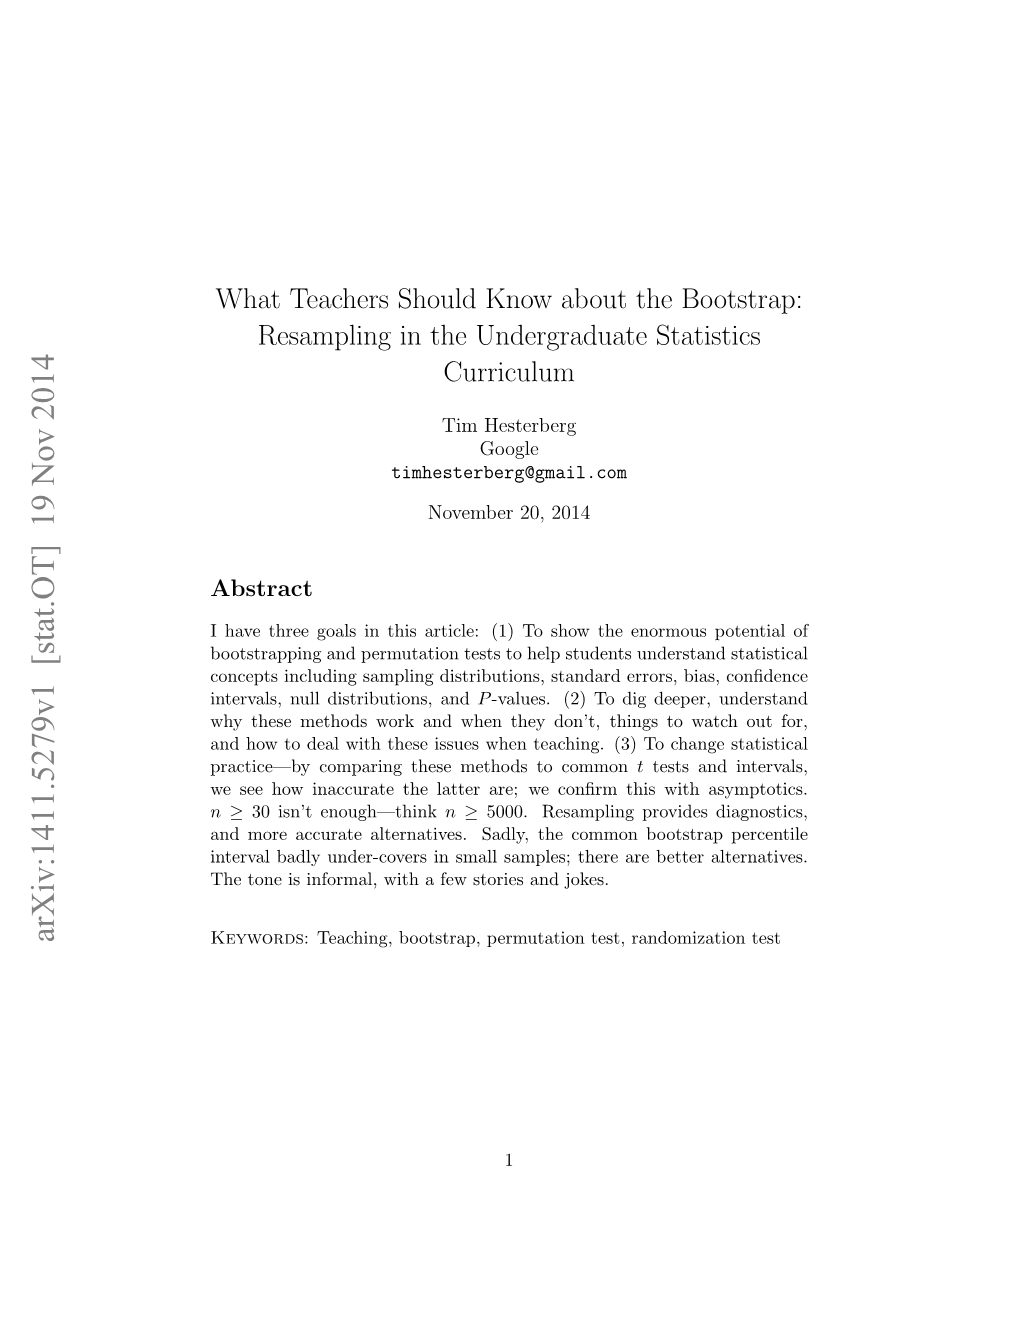 What Teachers Should Know About the Bootstrap: Resampling in the Undergraduate Statistics Curriculum